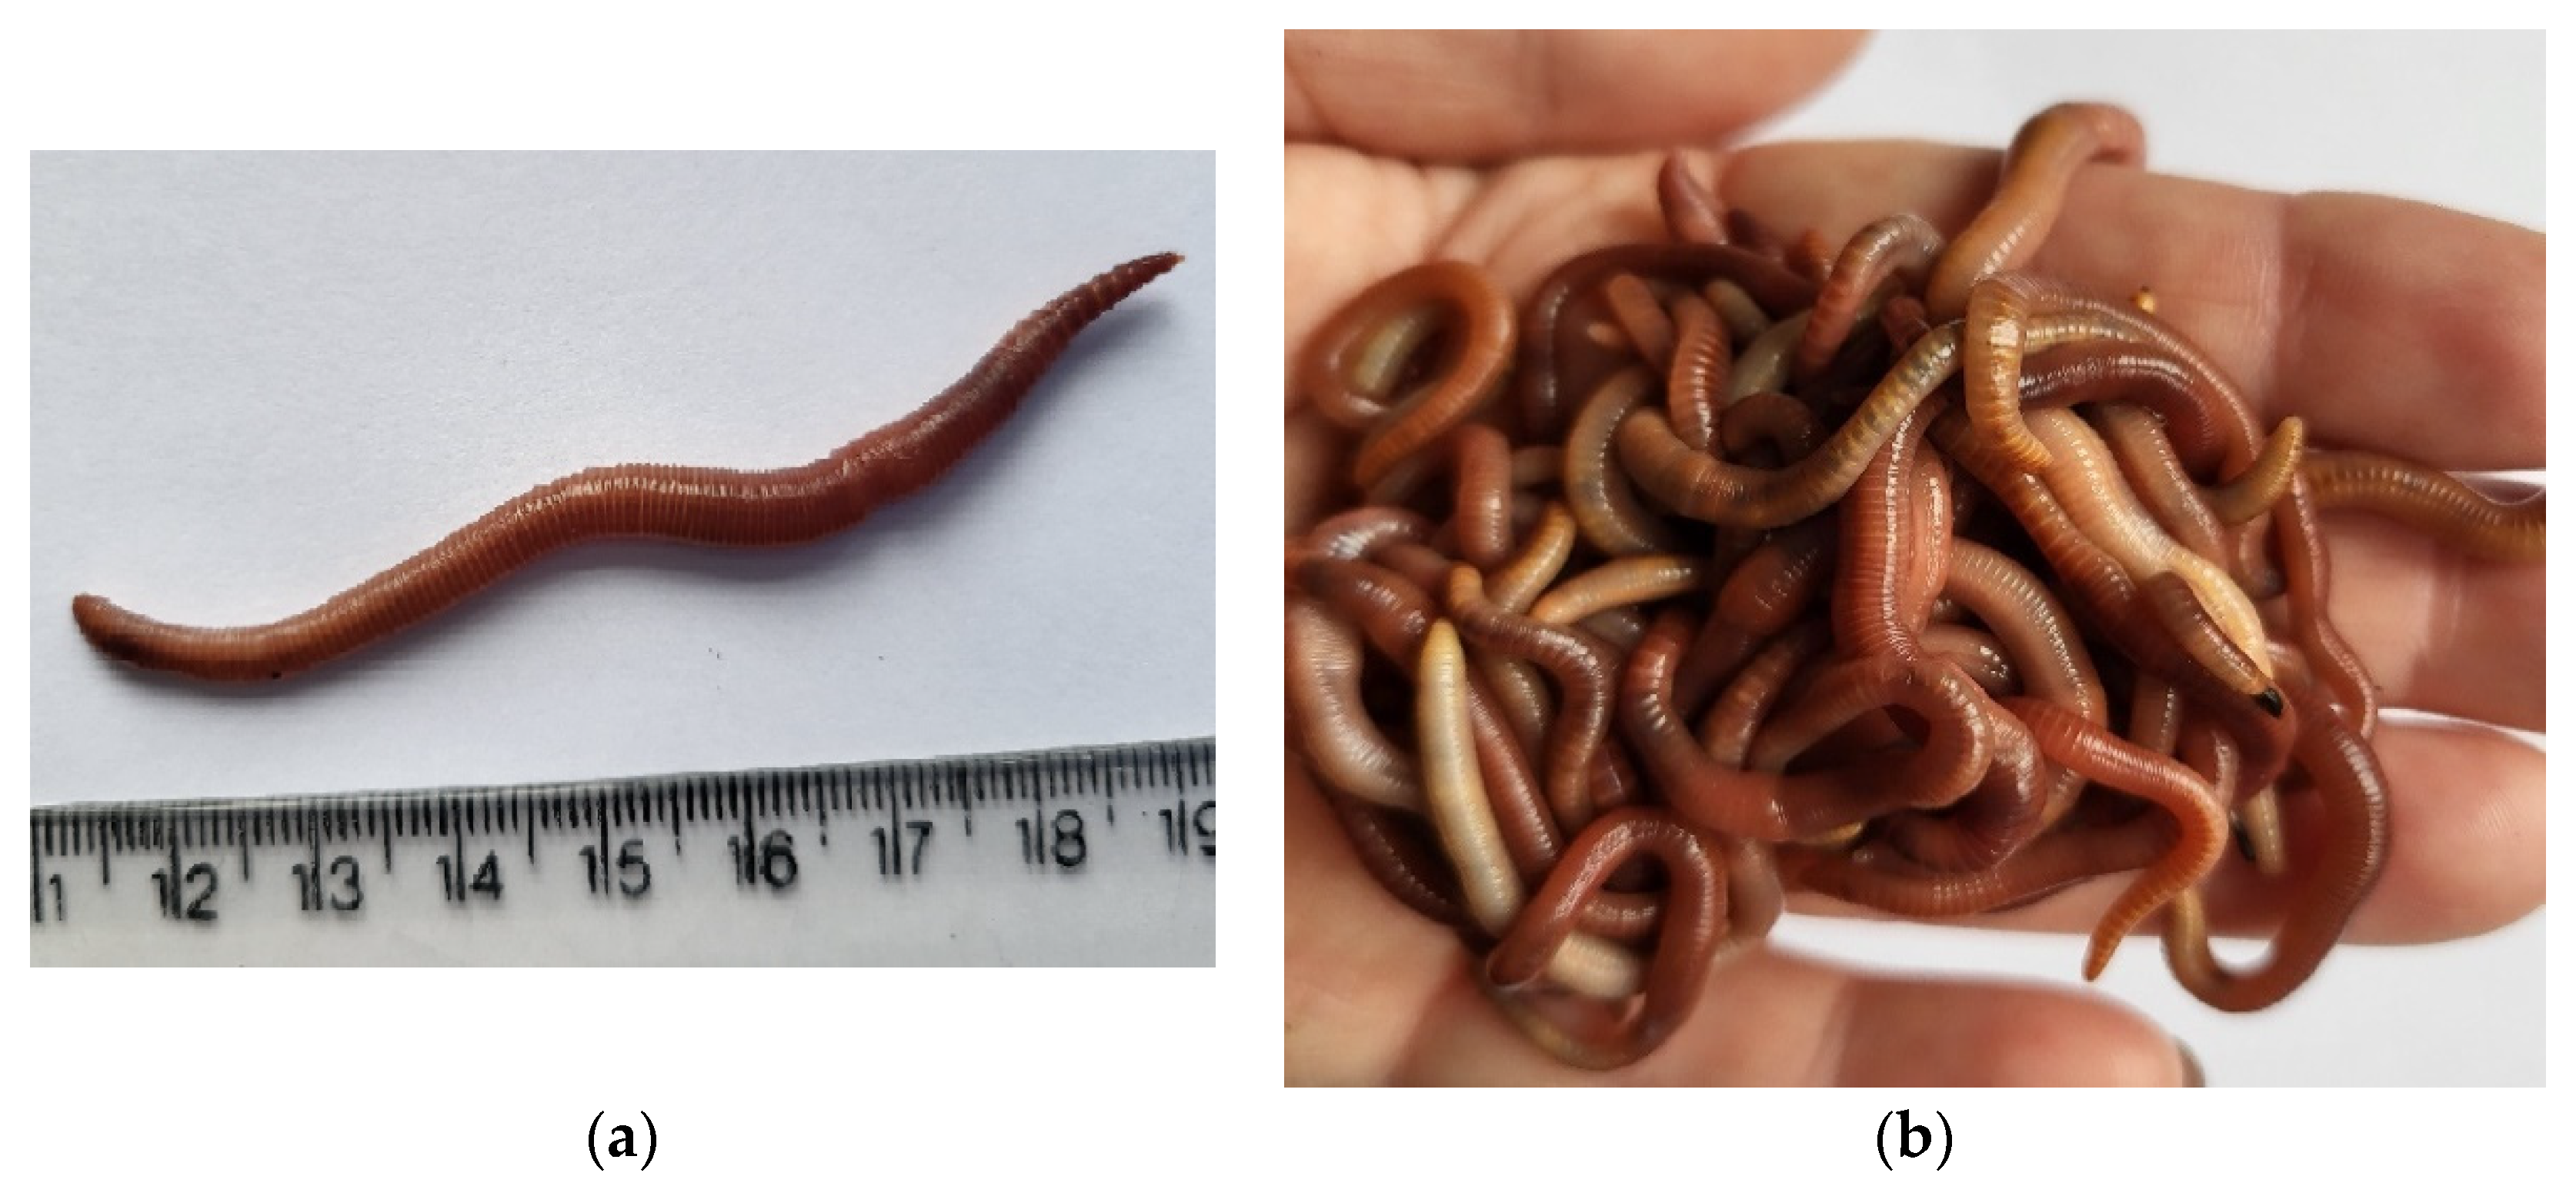 The red earthworm as an alternative protein source in aquafeeds